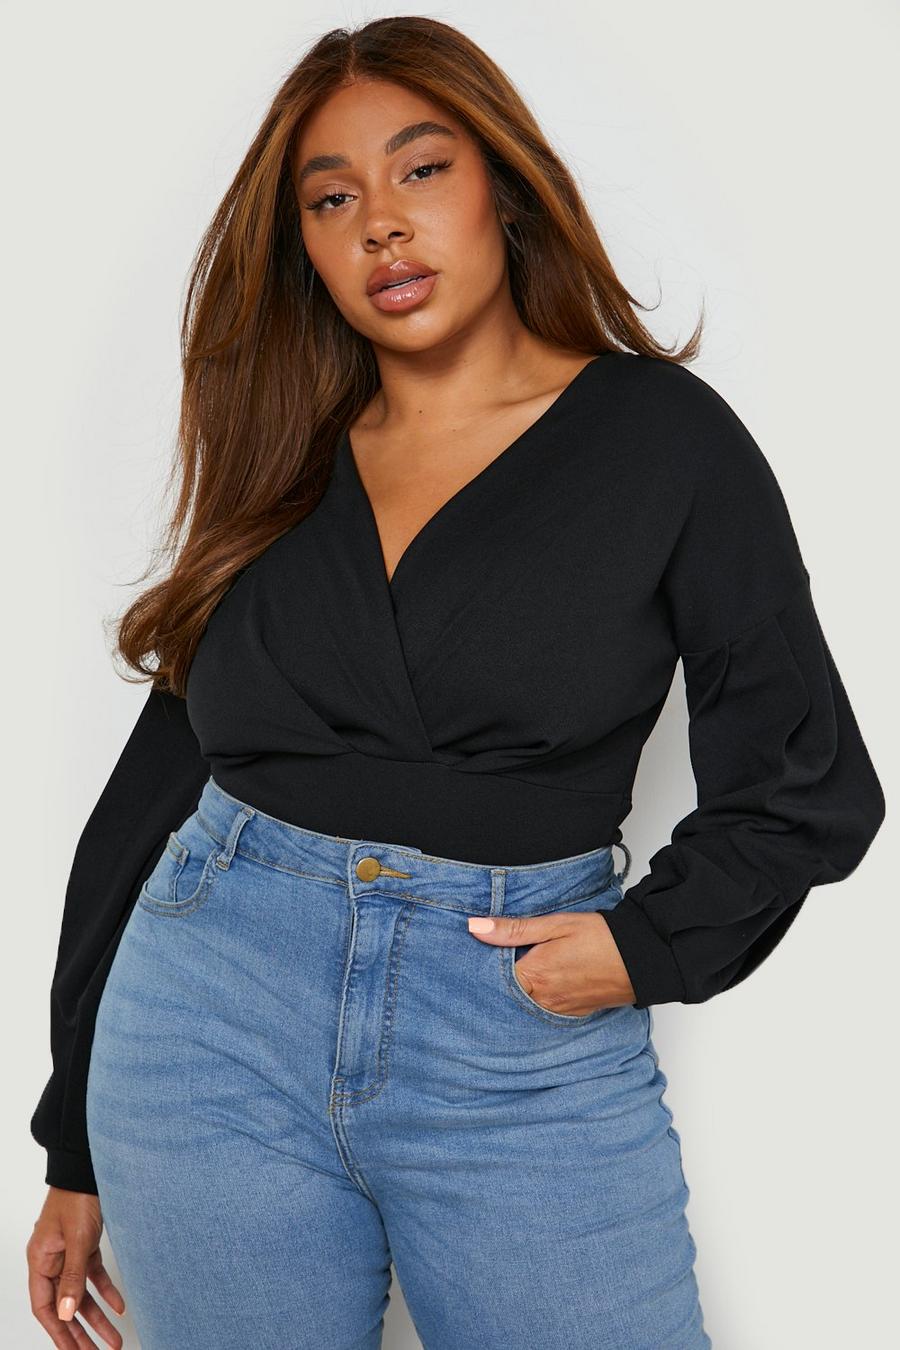 Plus Size Tops | Plus Size Going Out Tops | boohoo Ireland